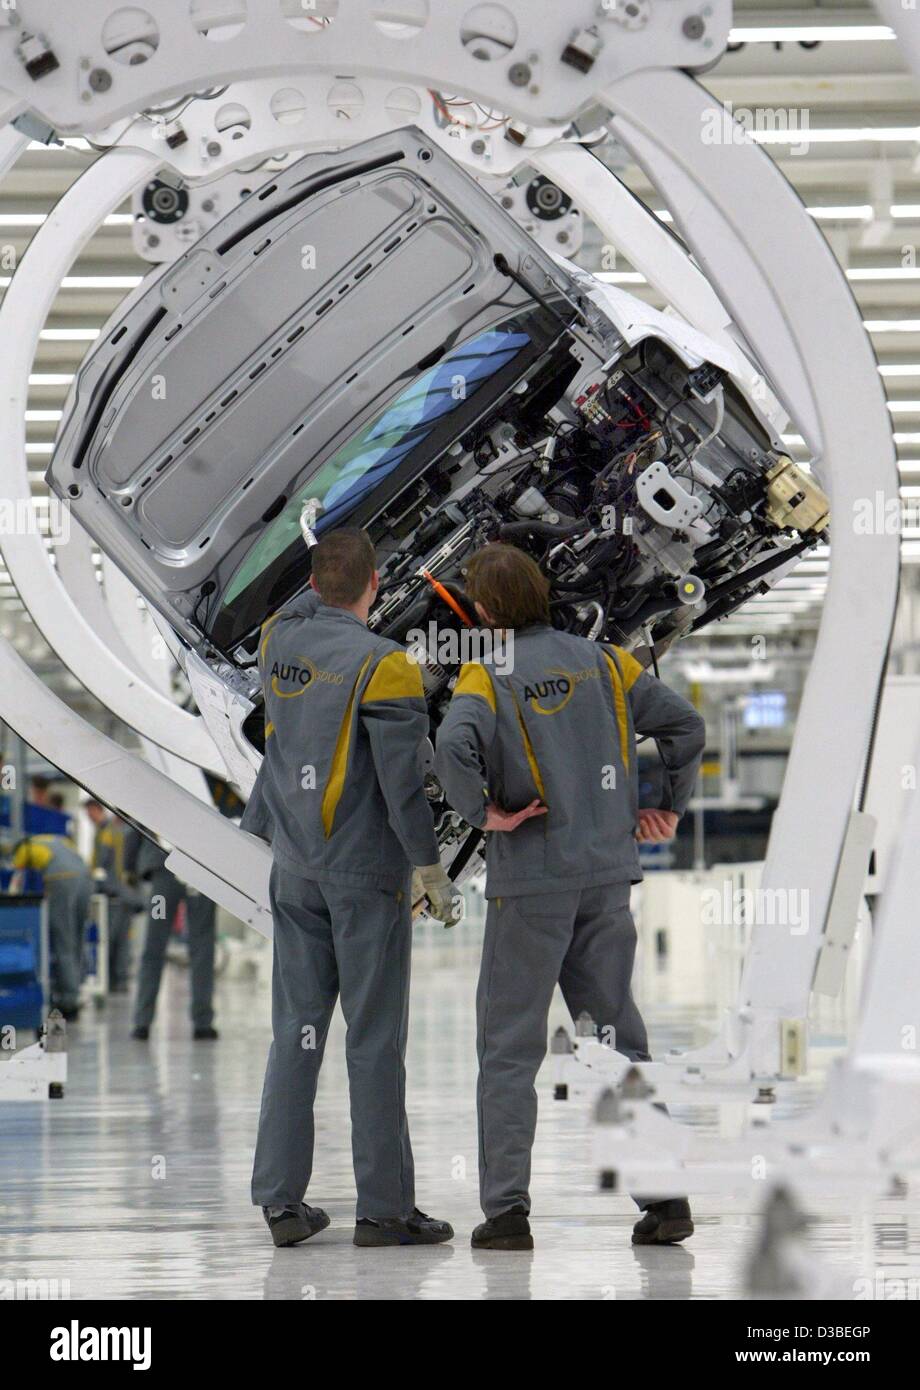 (dpa) - Two workers assemble parts of the new VW Touran on an assembly line in Wolfsburg, Germany, 13 January 2003. The Touran is a van based on the model of the VW Golf. The workers were employed in the scope of the project '5000 mal 5000' (5,000 times 5,000), which aims to create 5,000 new jobs. T Stock Photo